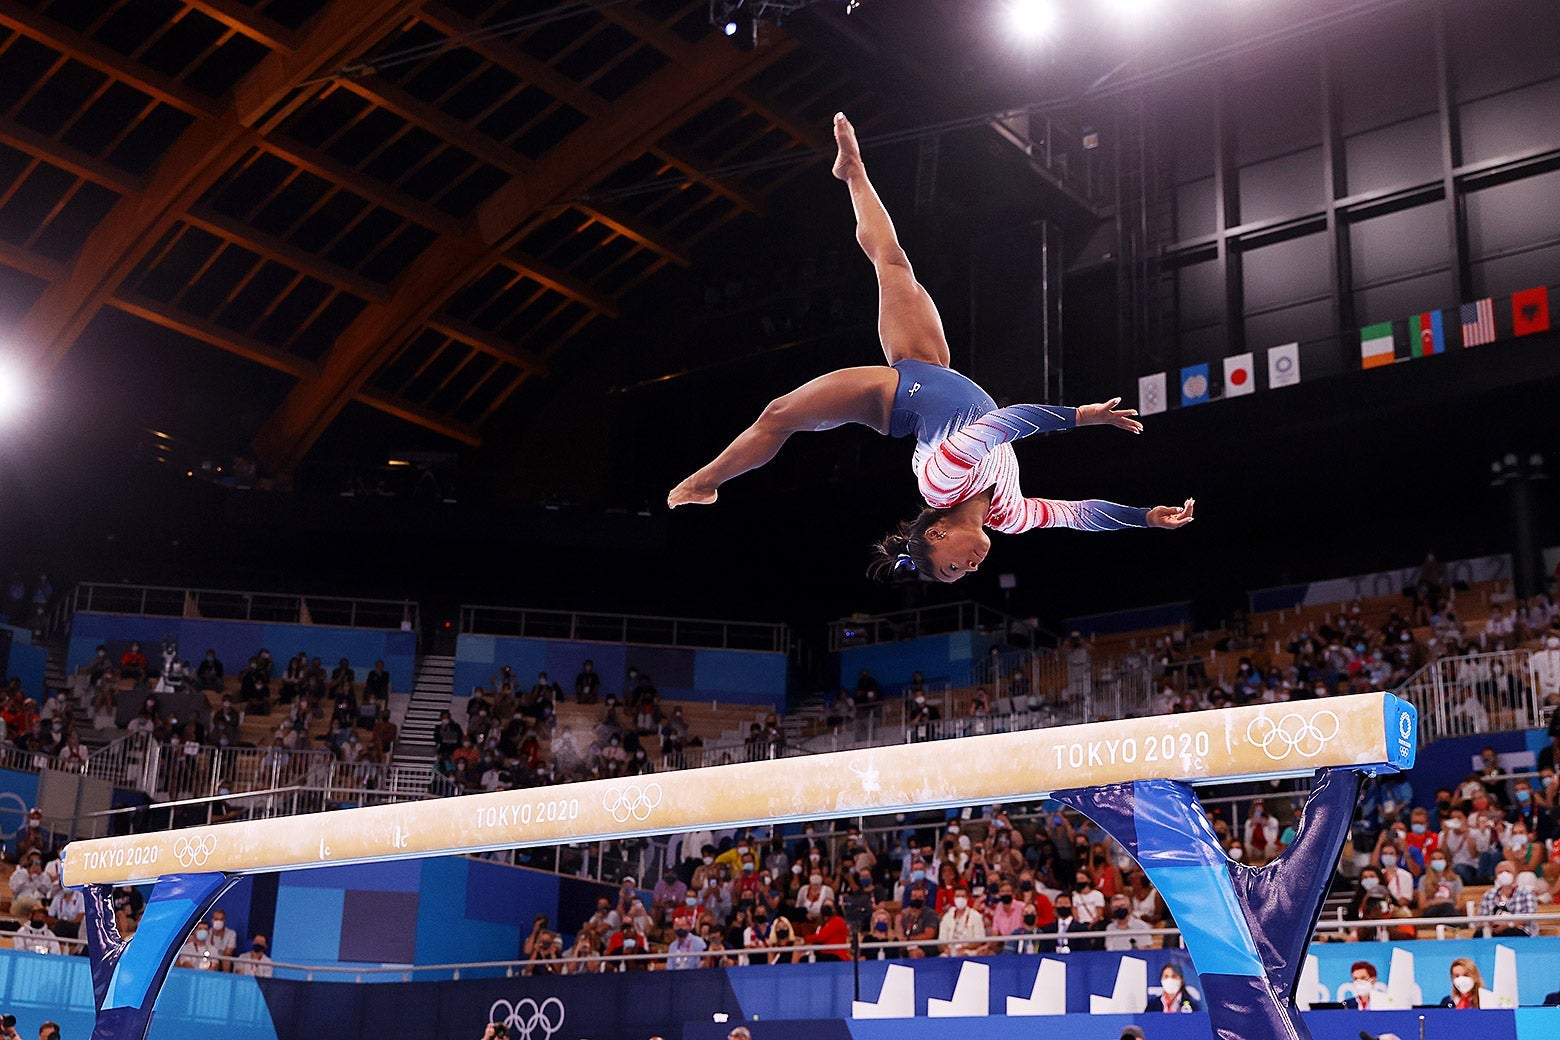 Biles upside down in midair as she does a flip on the balance beam